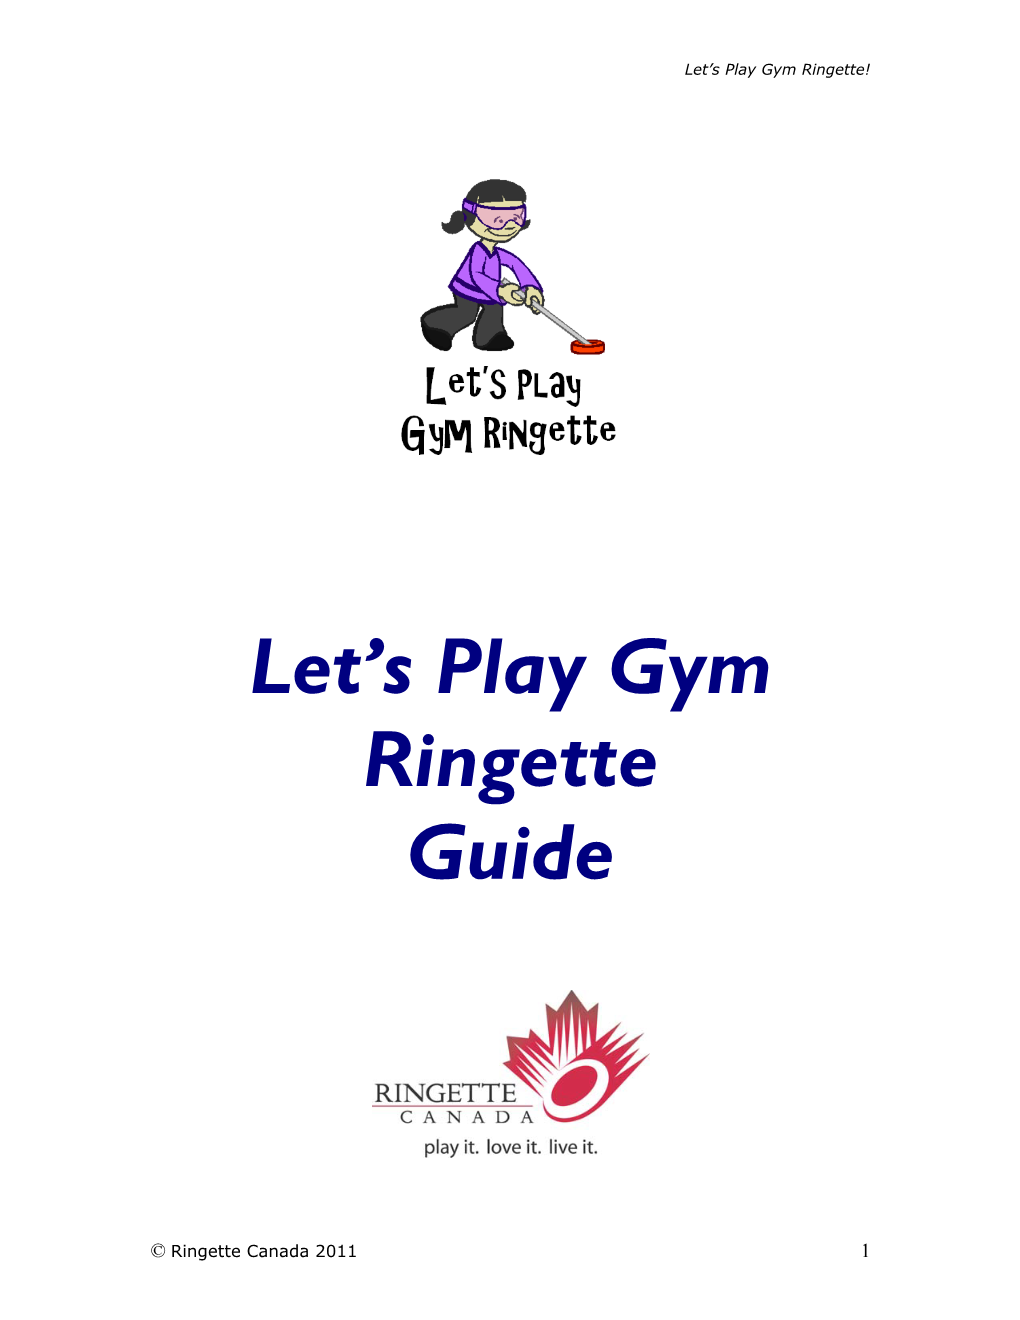 Let's Play Gym Ringette Guide